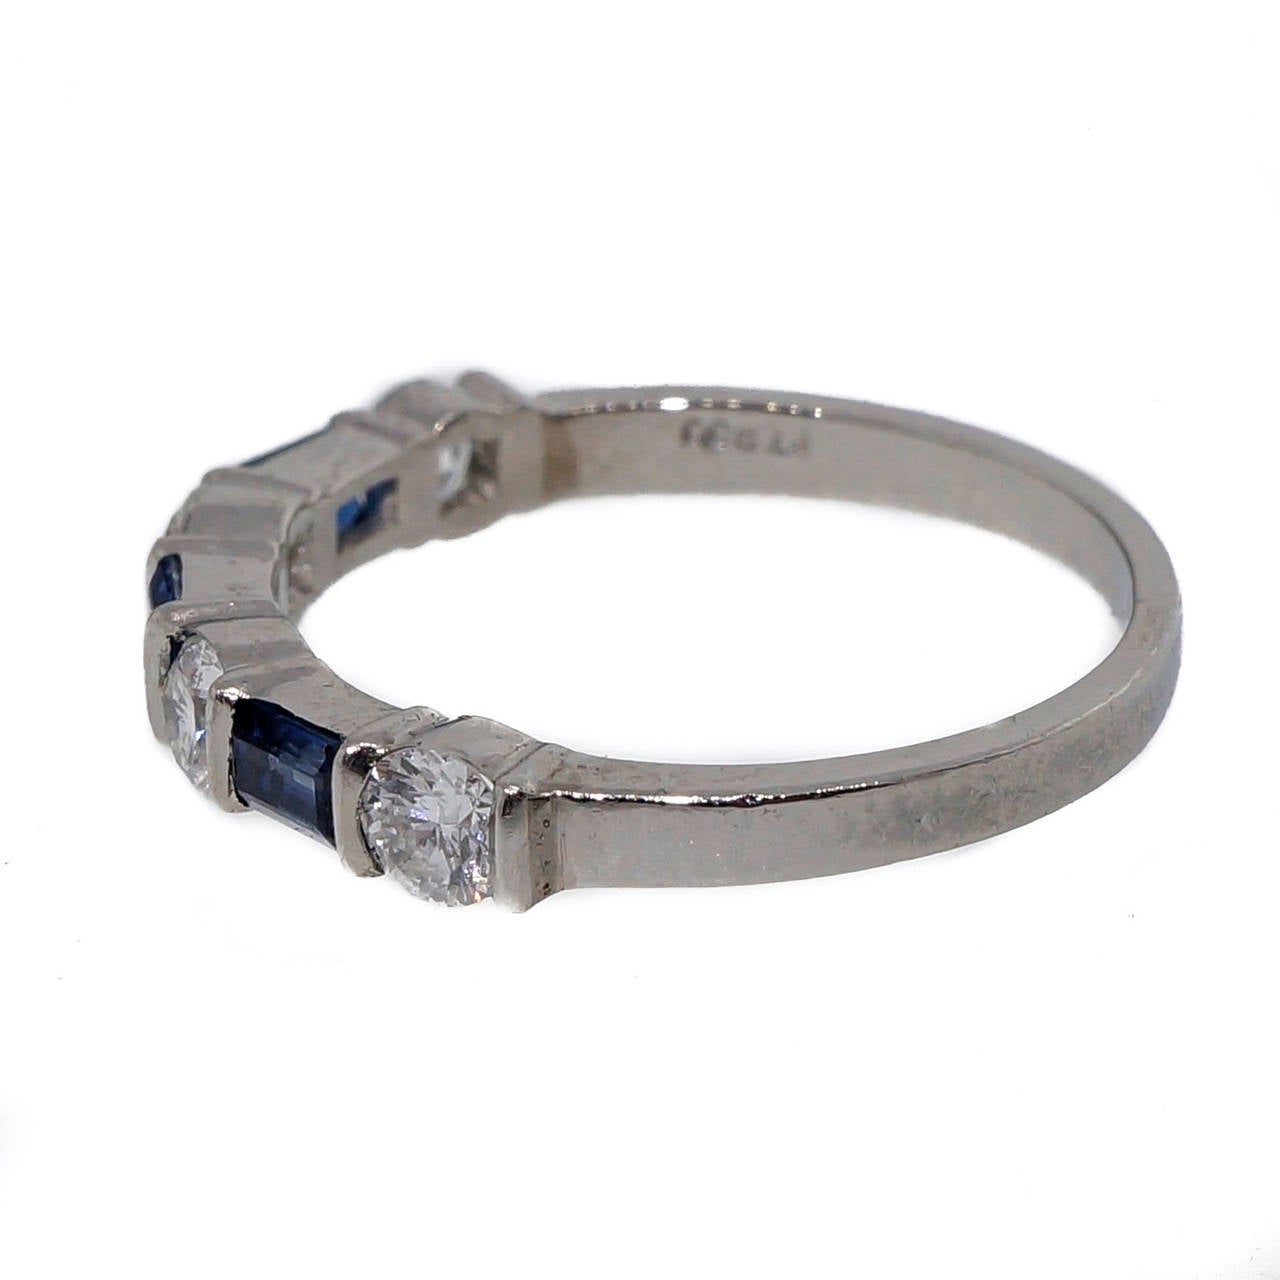 Authentic solid Platinum round diamond Sapphire baguette wedding band. Pre 2000 stamping. The T and I of Tiffany are worn off. Guaranteed authentic.

4 round Ideal cut full cut diamonds, approx. total weight .40cts, F, VS
3 blue Sapphire